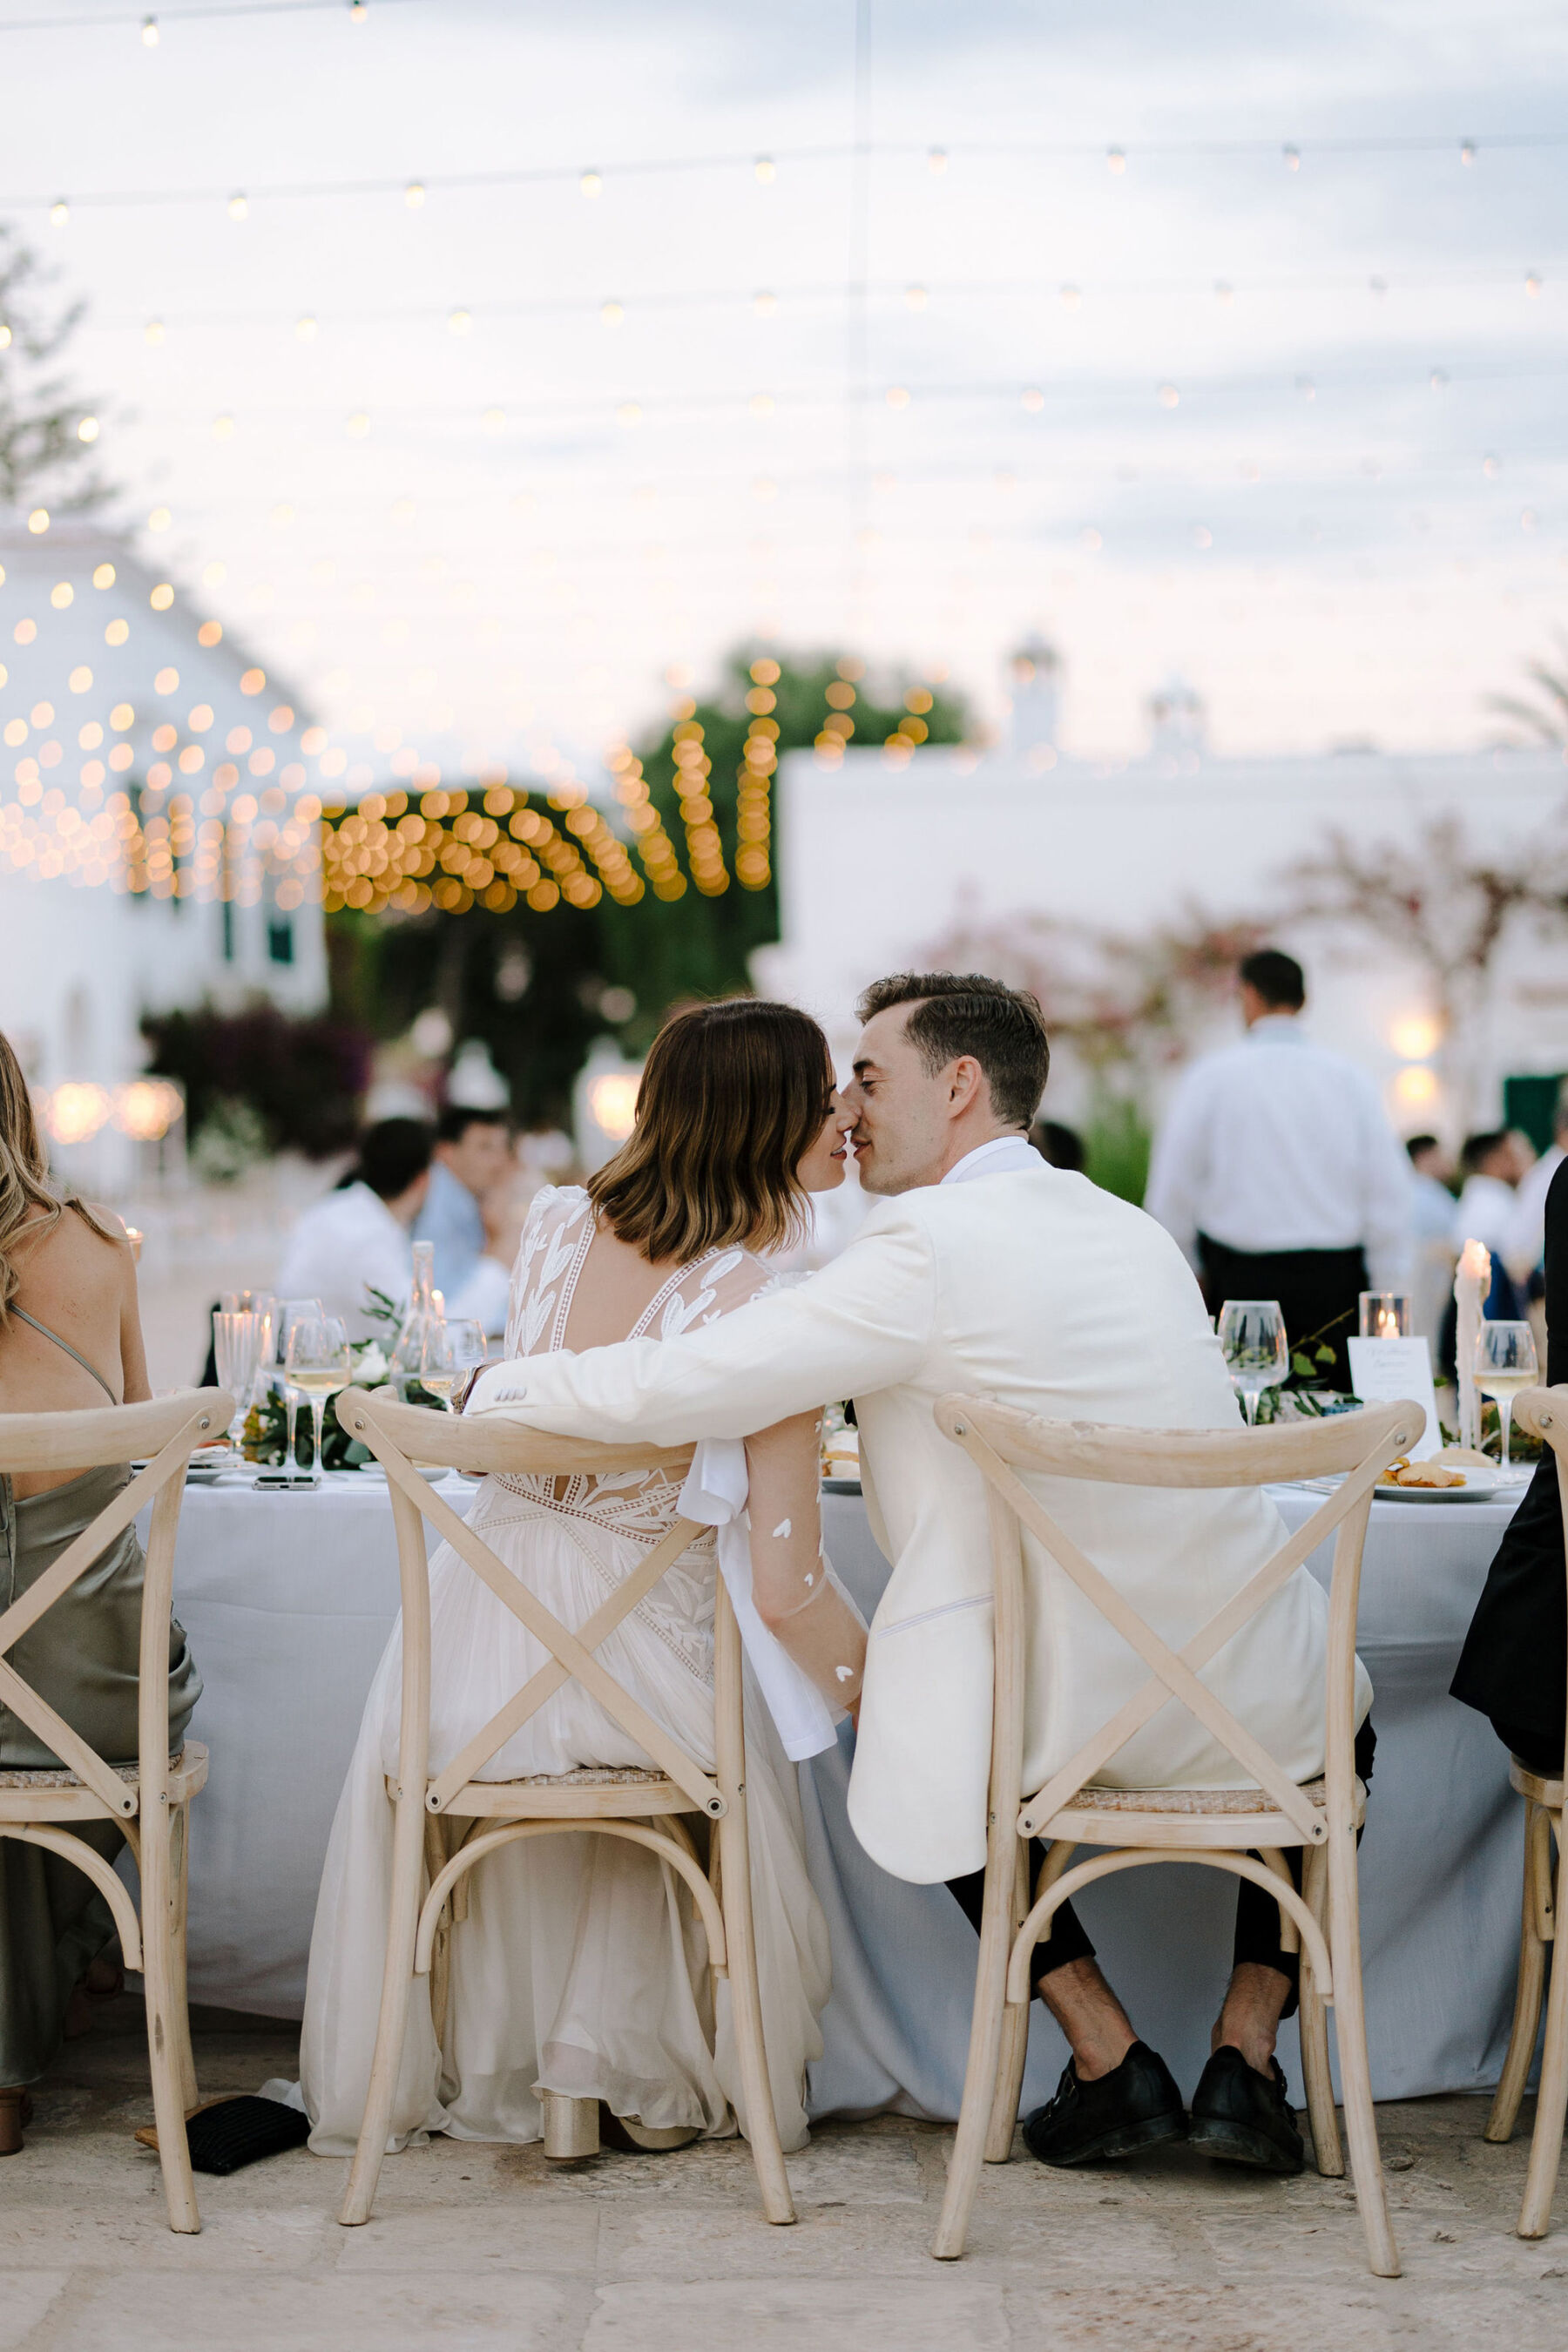 Bride and groom sitting on lime wash cross back chairs at an Italian villa wedding.